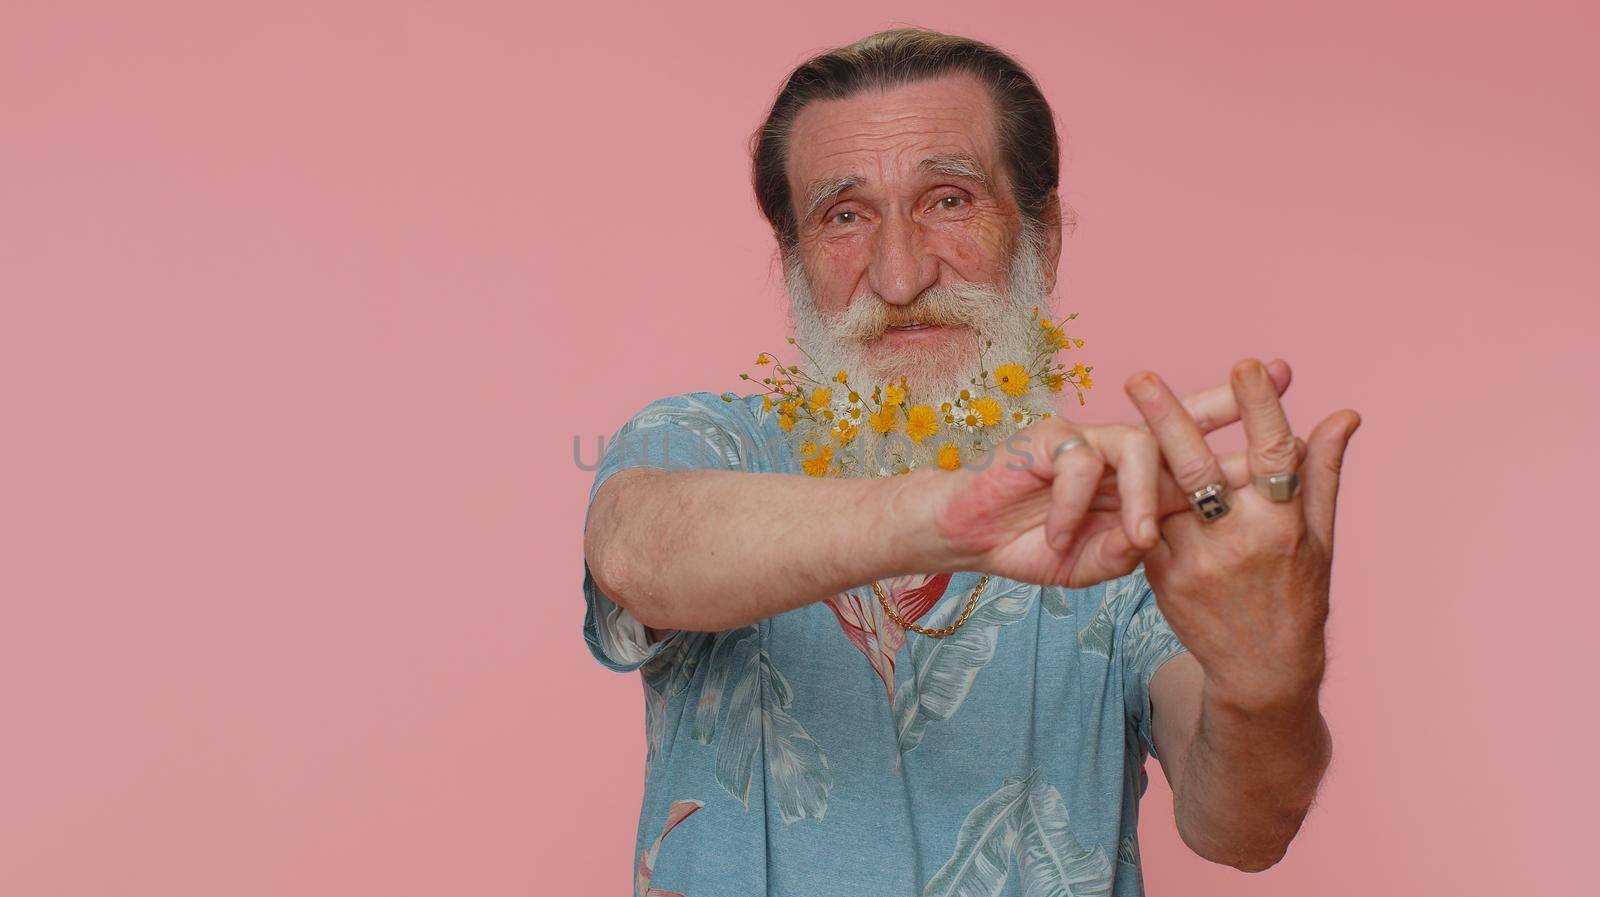 Cheerful senior man with flowers in beard showing hashtag symbol with hands, likes tagged message, popular viral content, sign to follow internet online trends. Elderly grandfather on pink studio wall